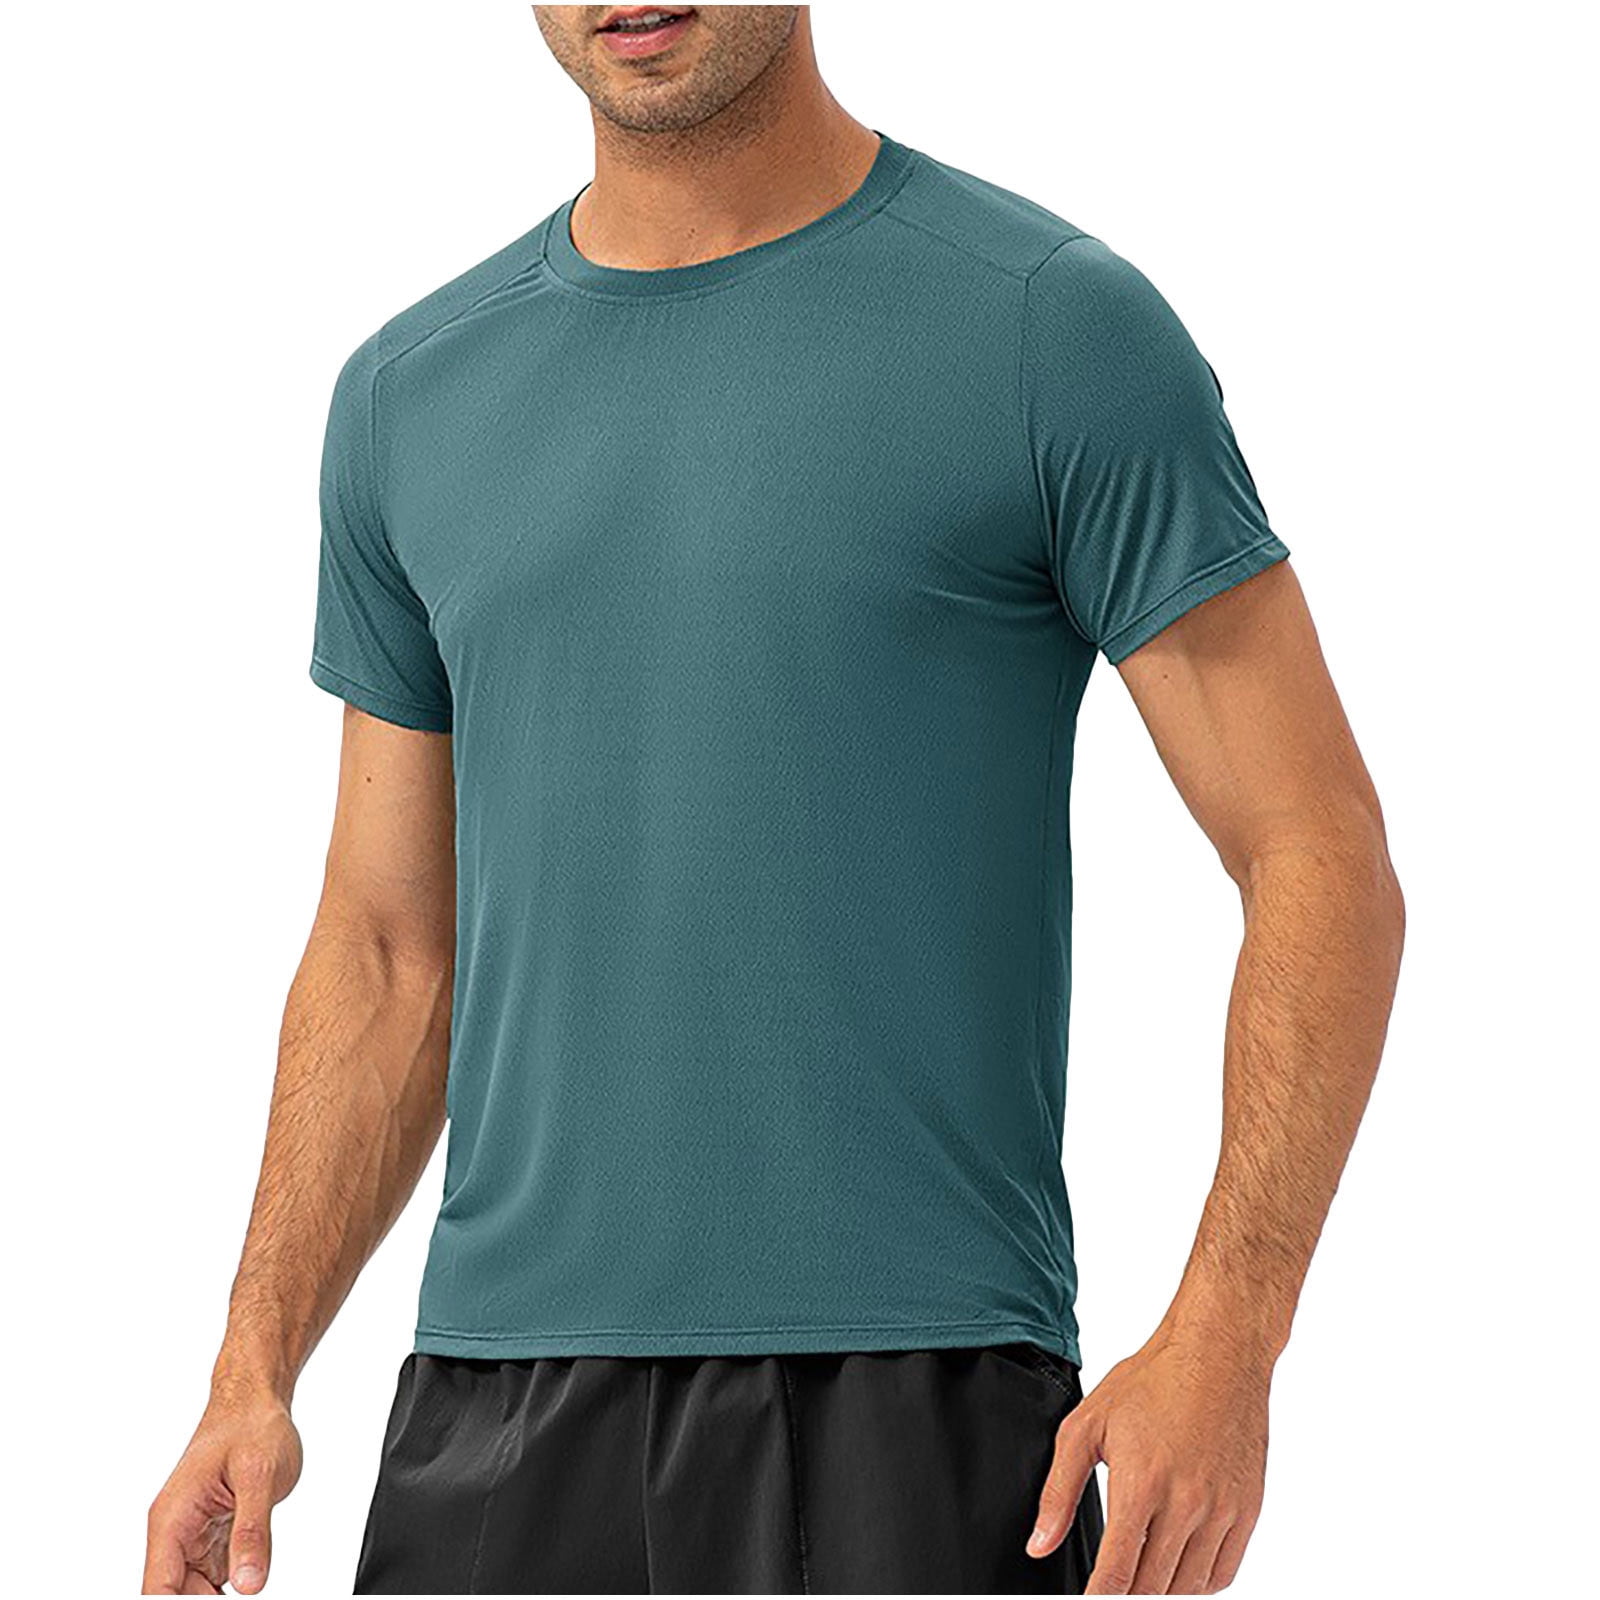 YYDGH Men's Short Sleeve Running T Shirt Casual Breathable Fitness Round  Neck Shirt Solid Loose Fit Outdoor Athletic Top(Blue,XL)